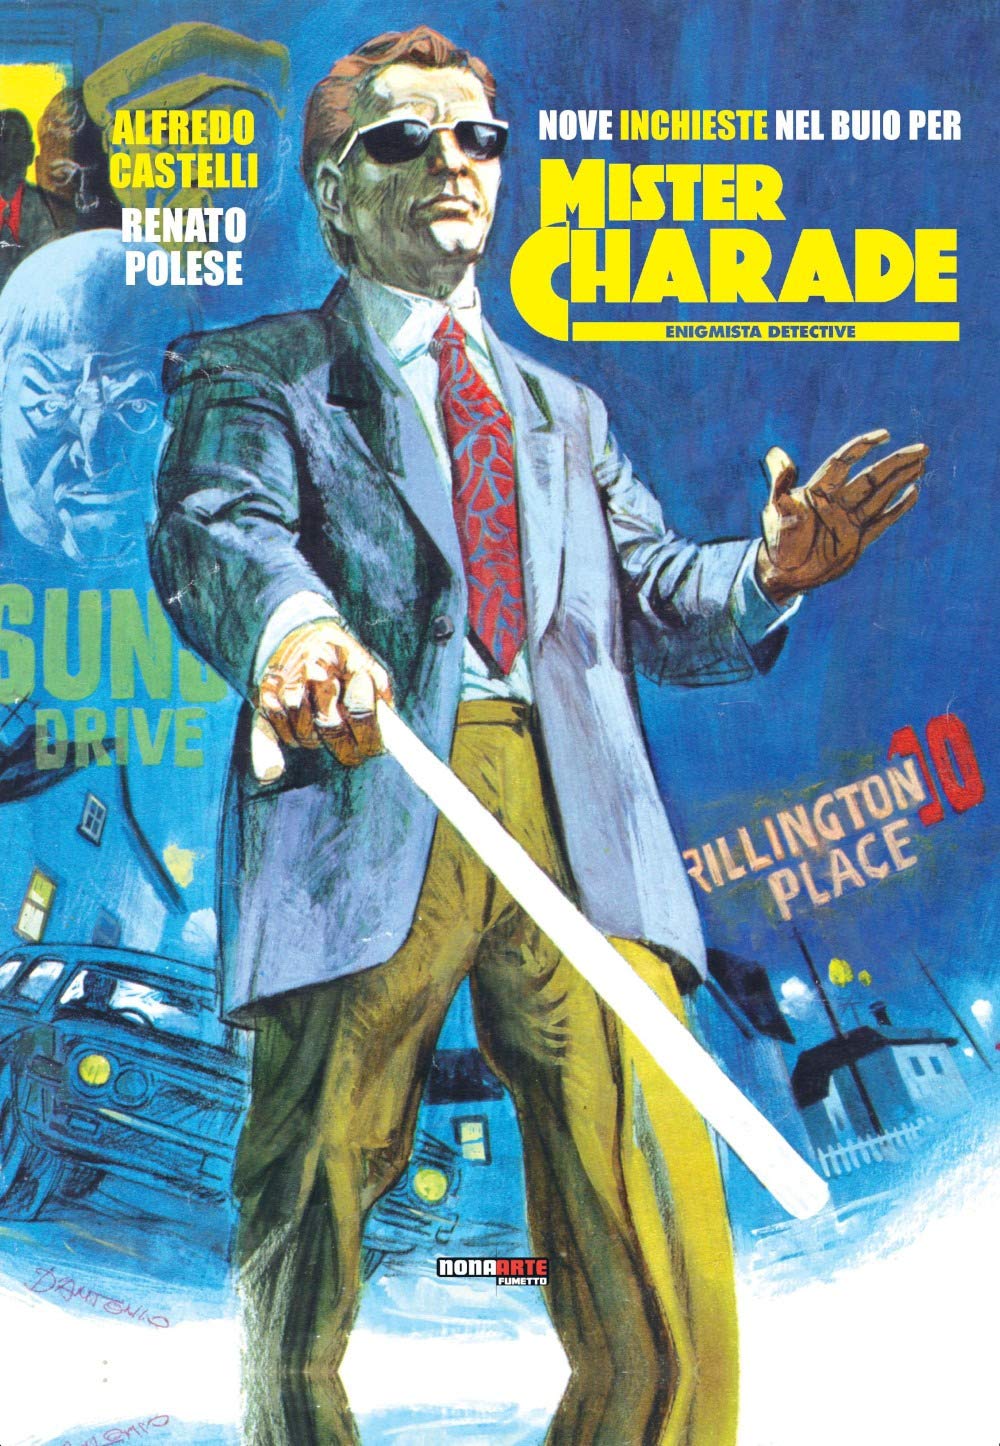 the Mysterious Mister Charade